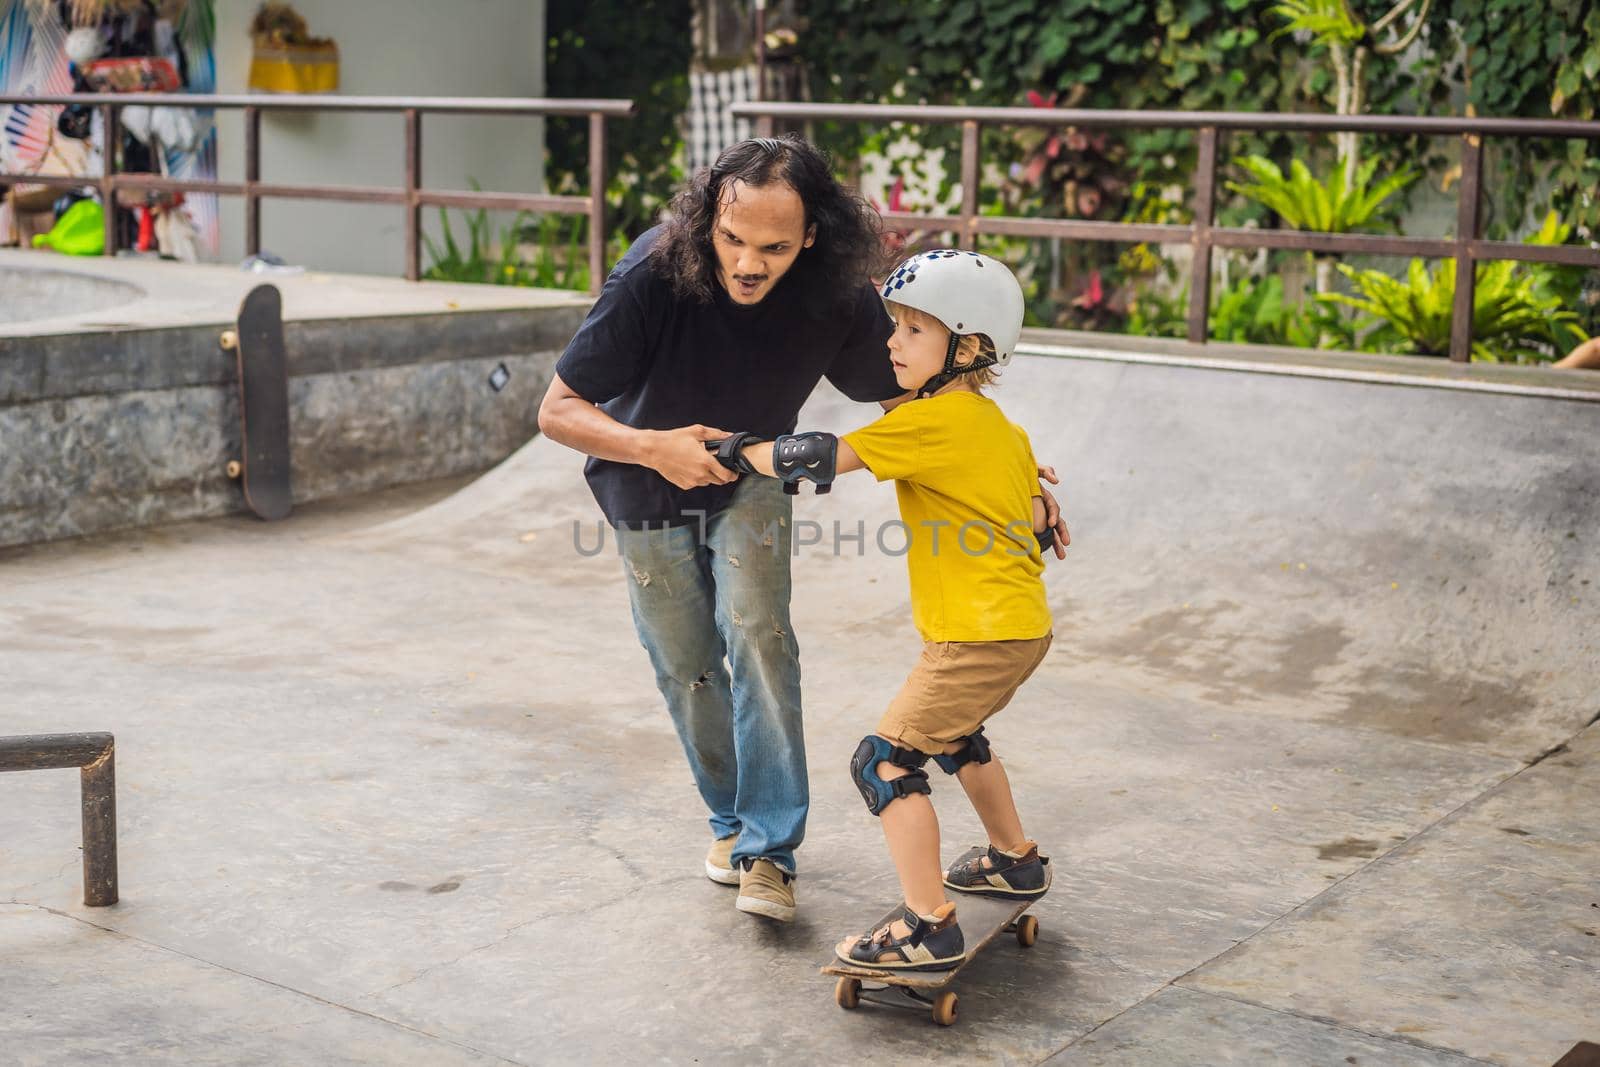 Athletic boy learns to skateboard with asian trainer in a skate park. Children education, sports. Race diversity.